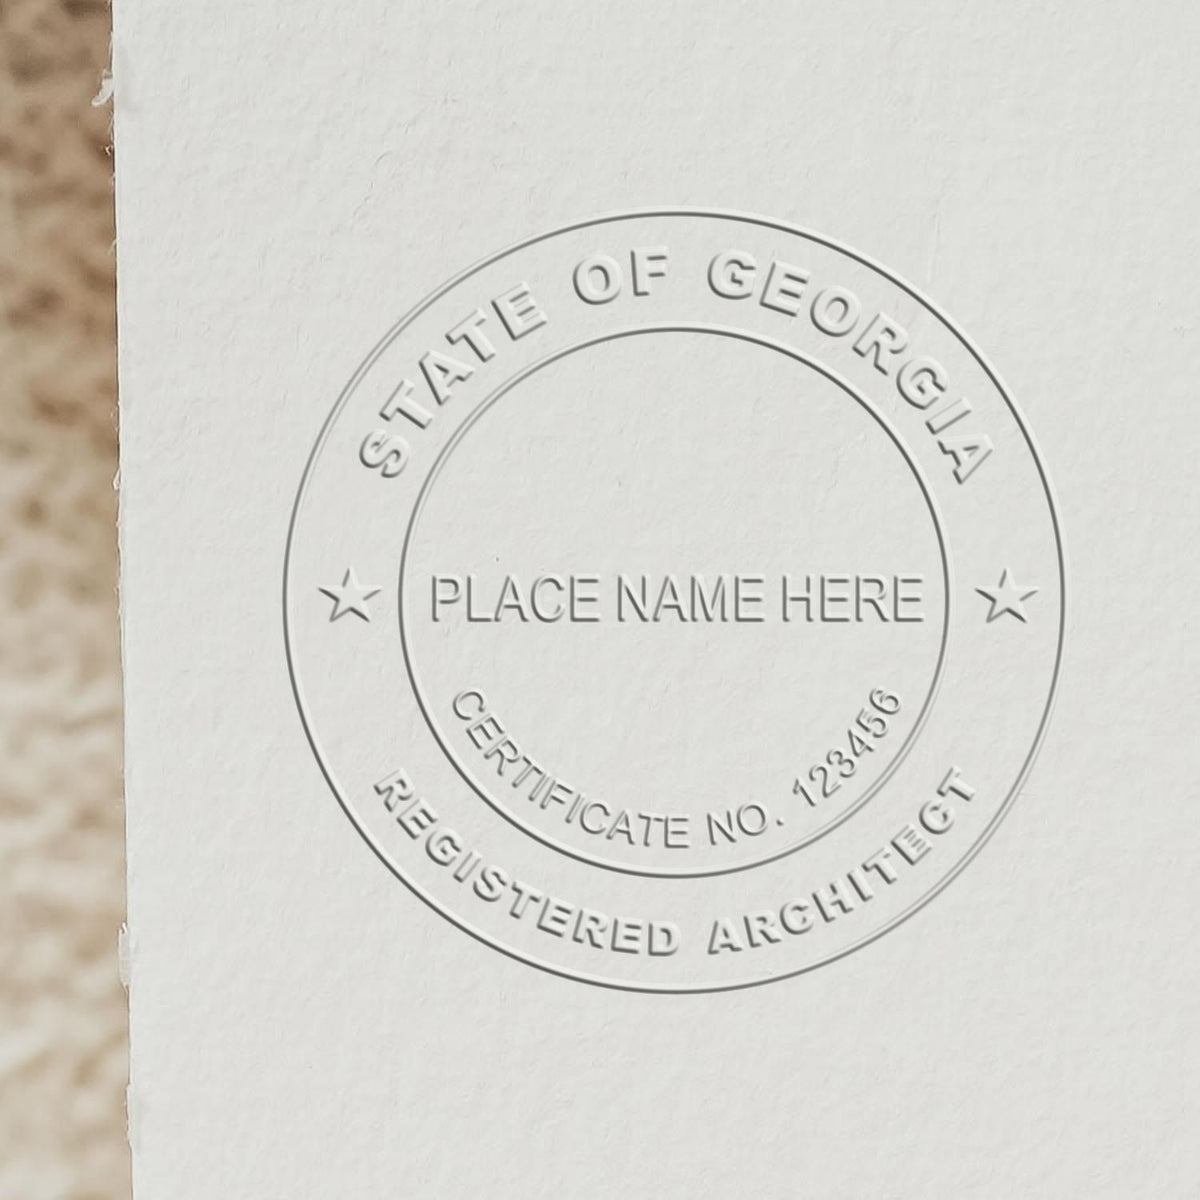 Extended Long Reach Georgia Architect Seal Embosser in use photo showing a stamped imprint of the Extended Long Reach Georgia Architect Seal Embosser